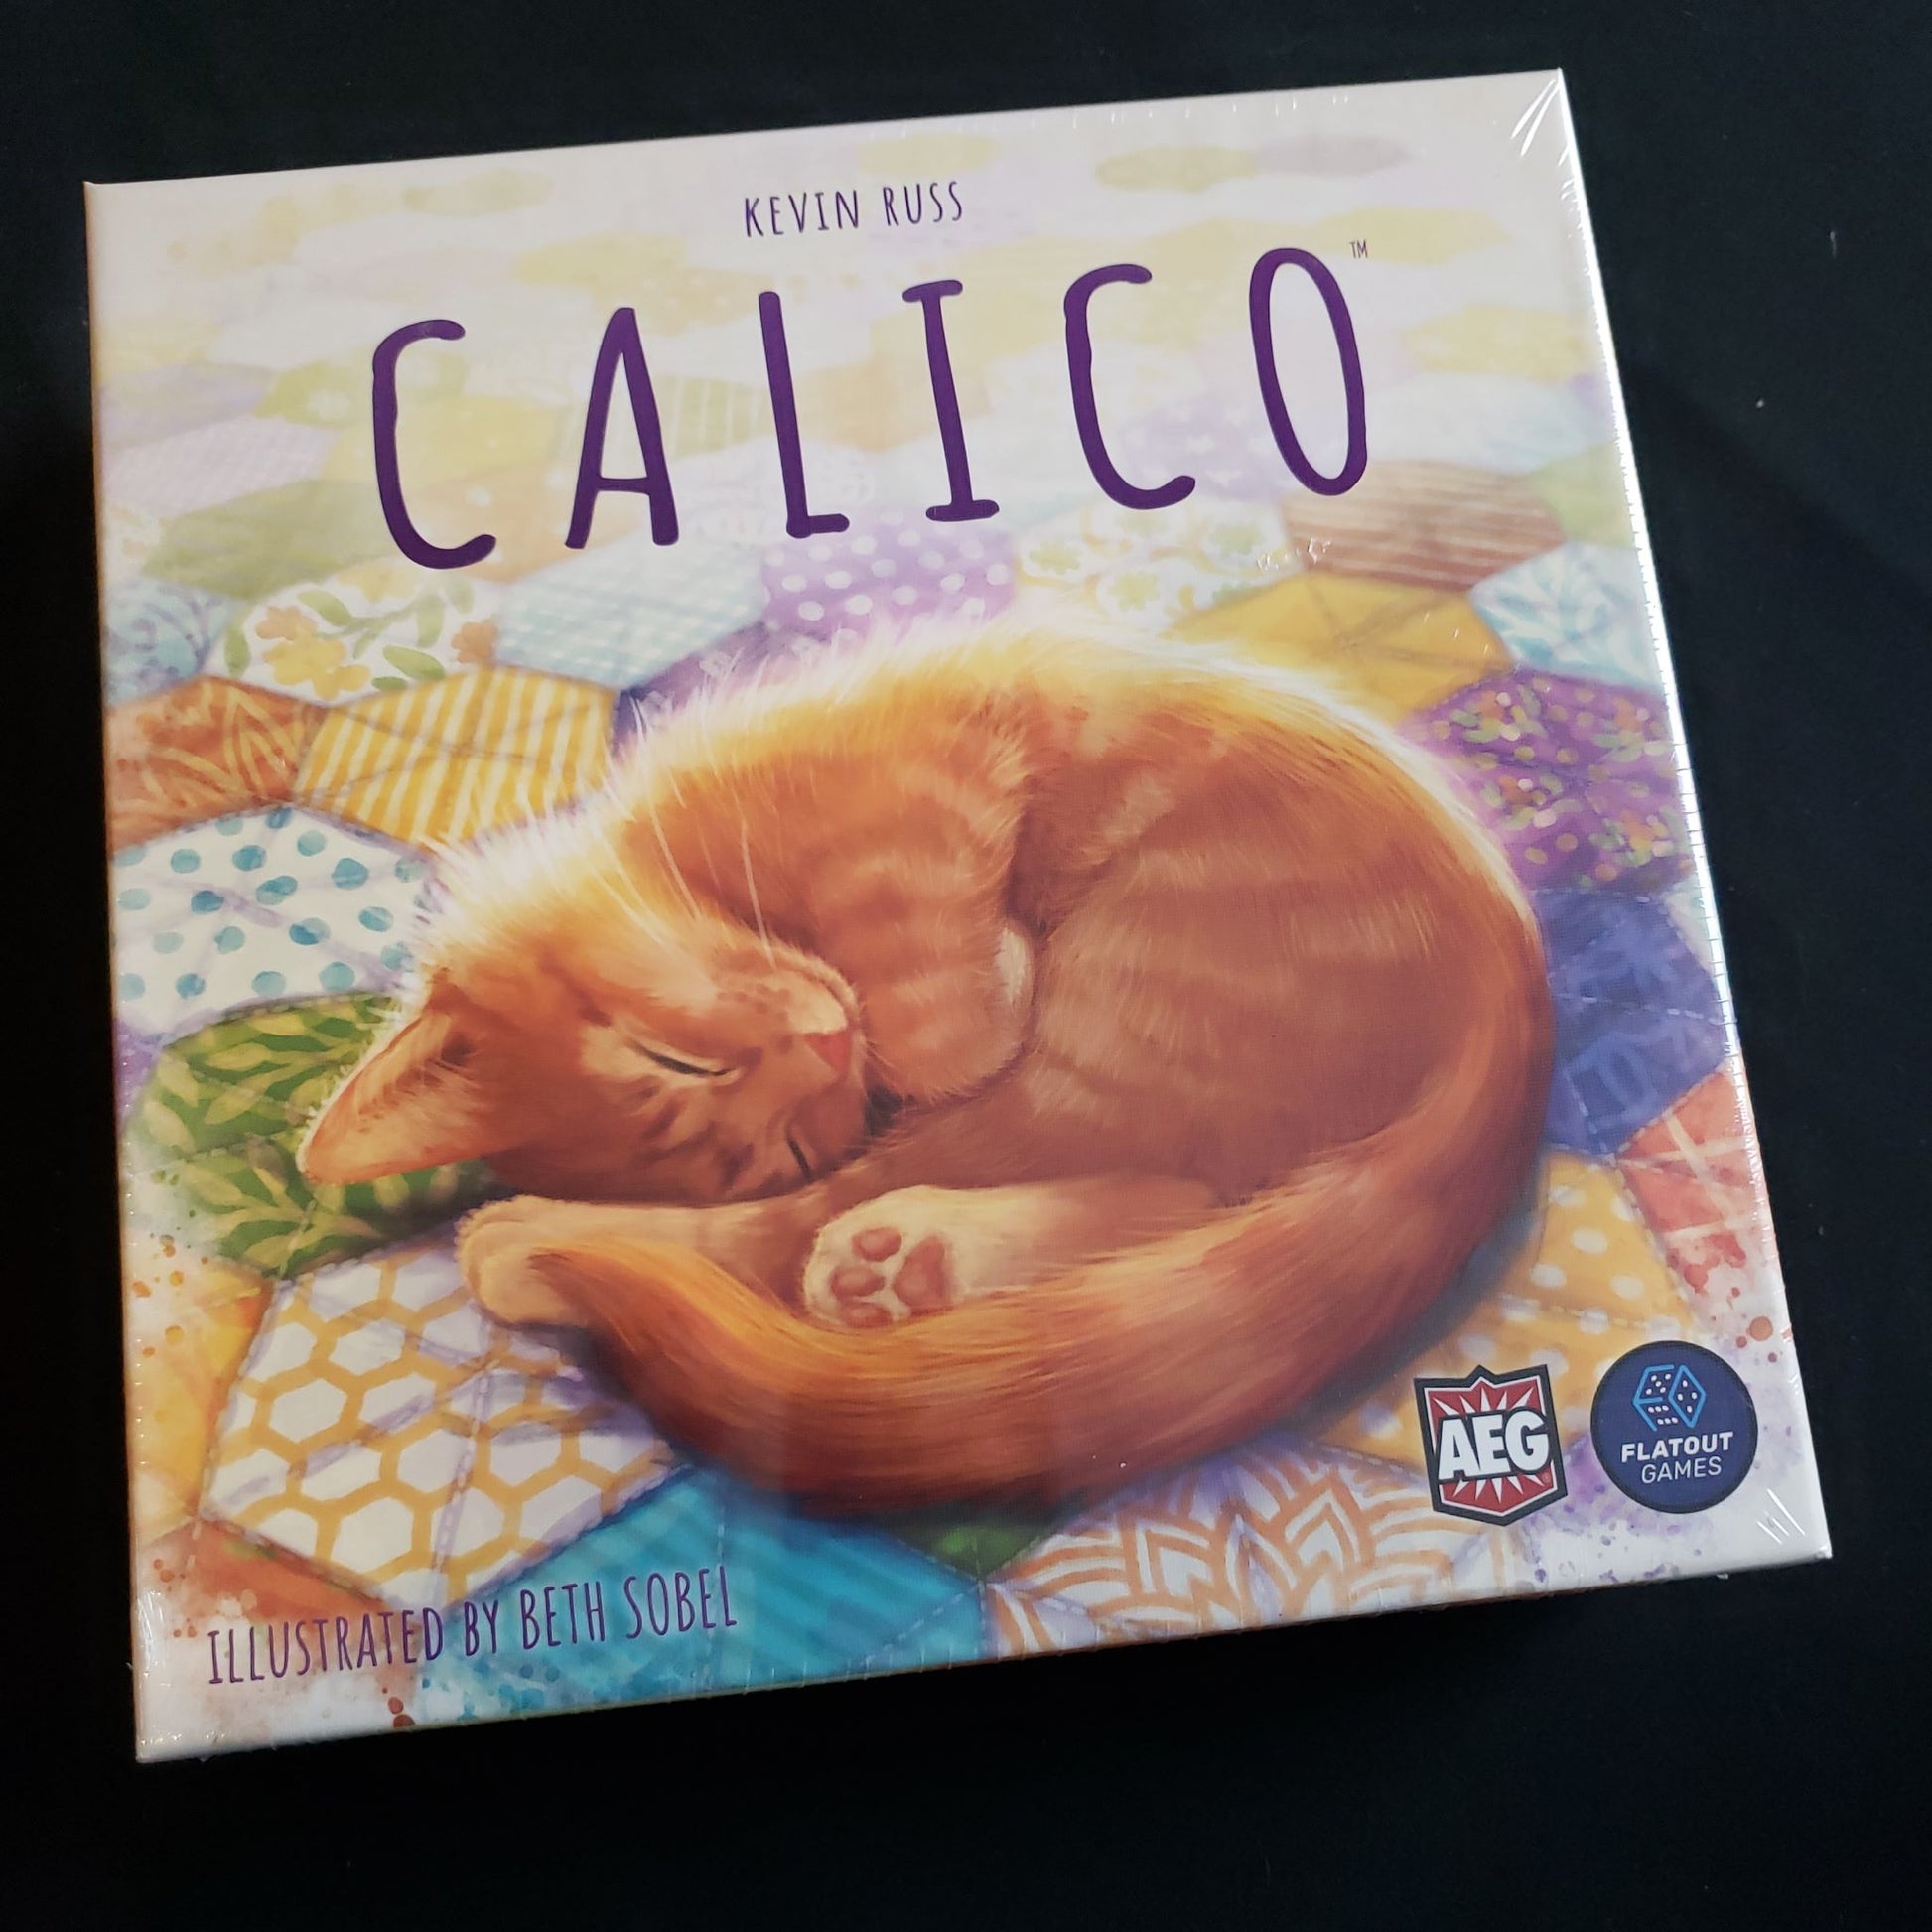 Image shows the front cover of the box of the Calico board game